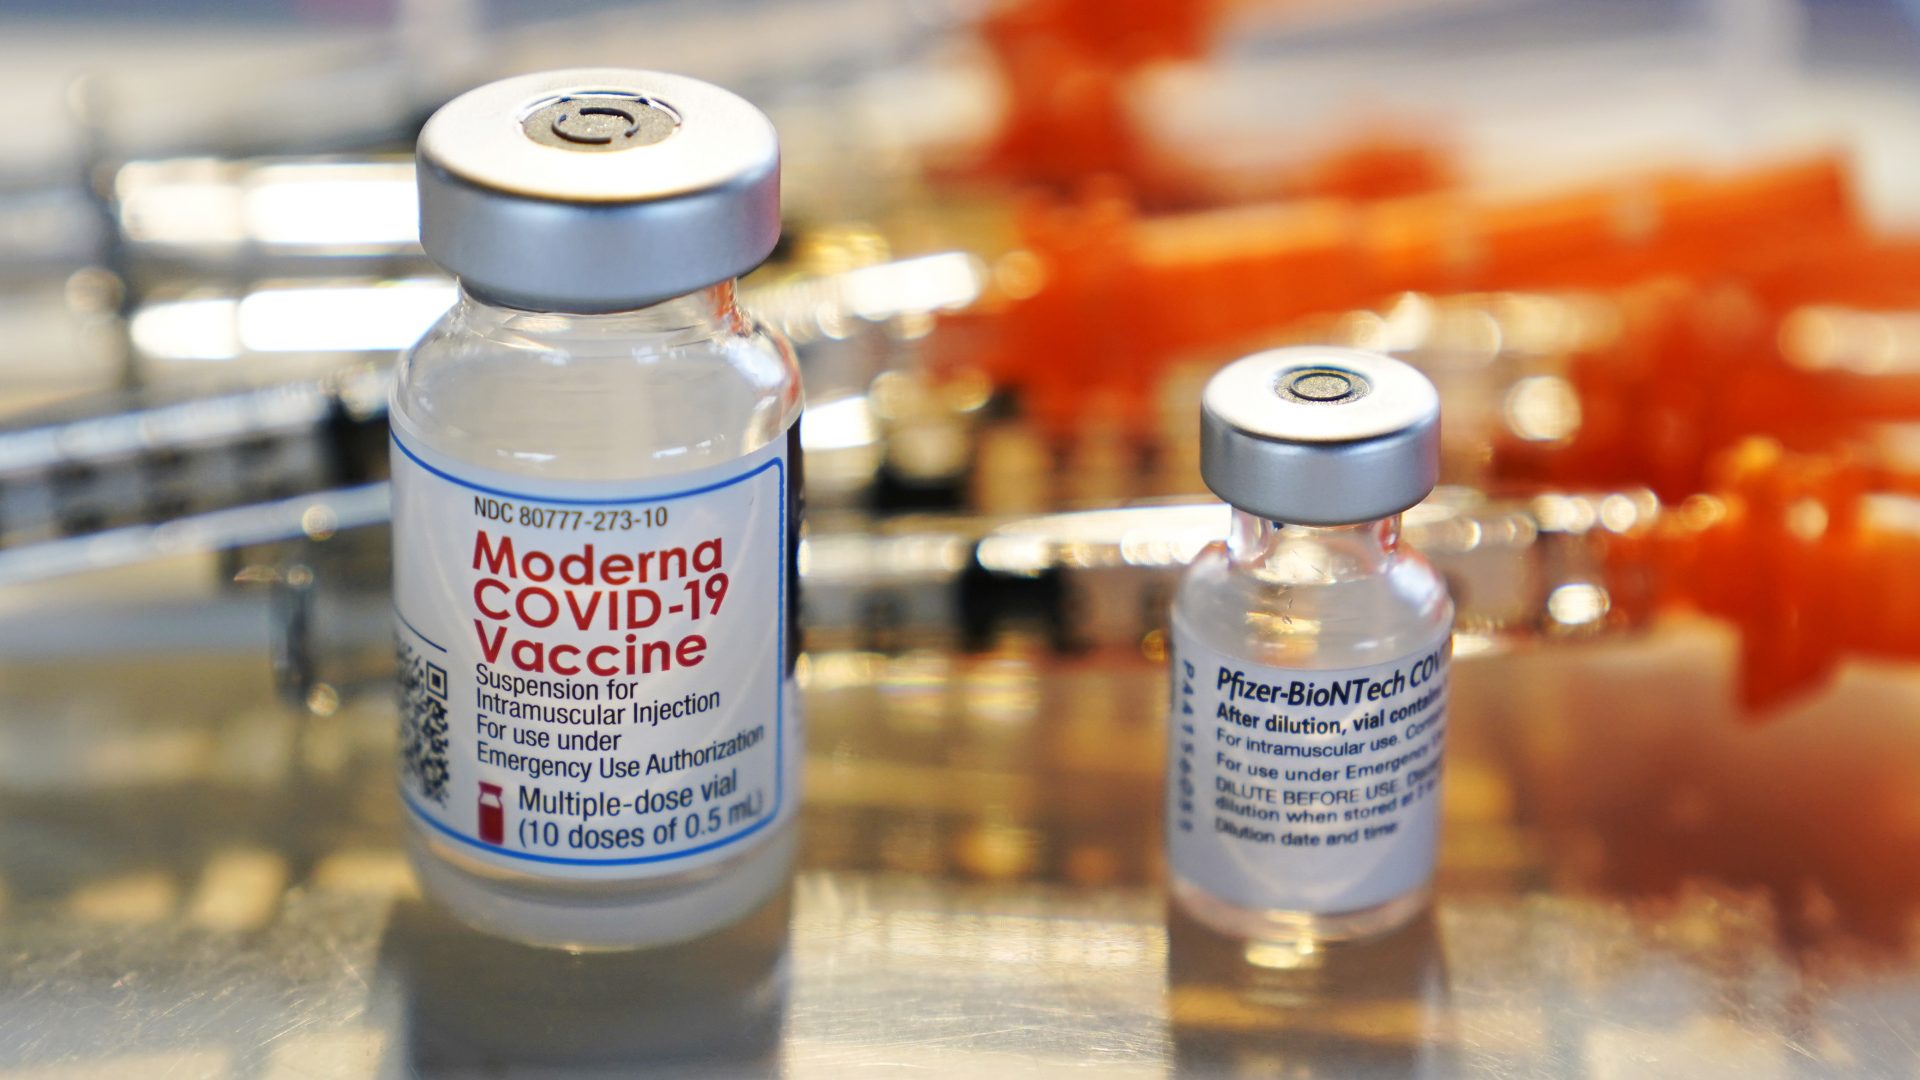 FILE PHOTO: In this Feb. 25, 2021, file photo, vials for the Moderna and Pfizer COVID-19 vaccines are displayed on a tray at a clinic set up by the New Hampshire National Guard in the parking lot of Exeter, N.H., High School.